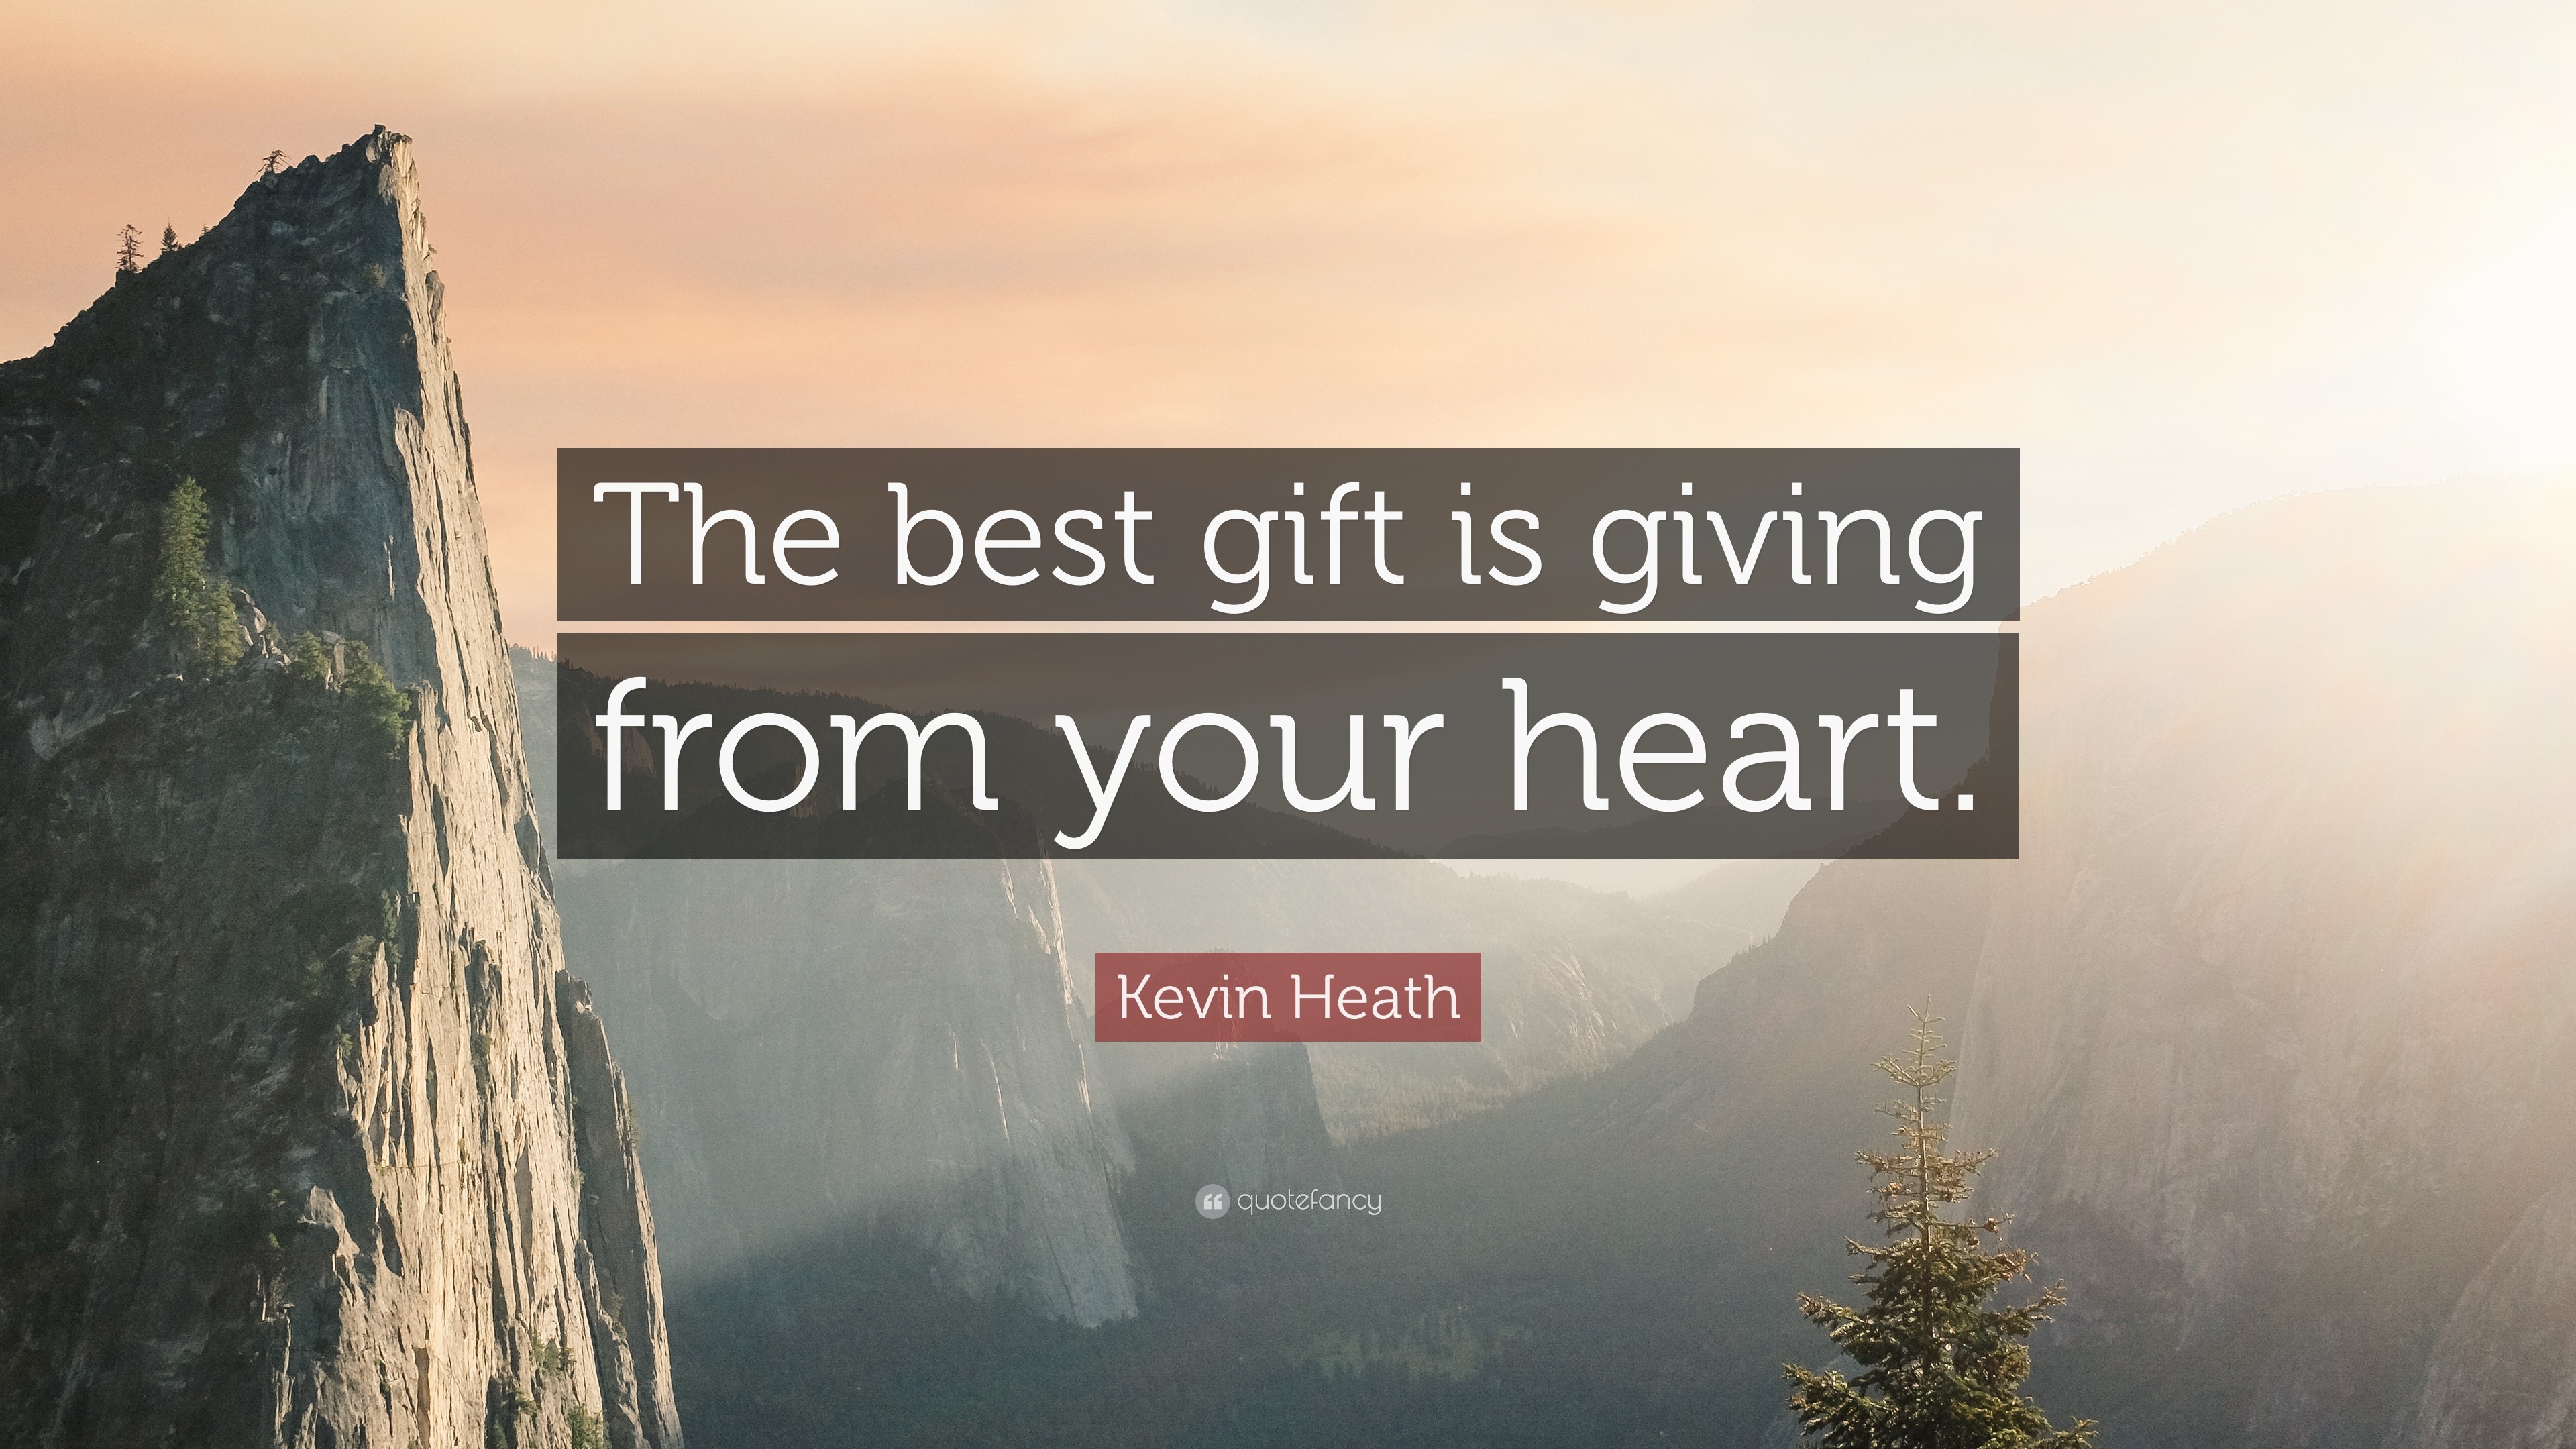 https://quotefancy.com/media/wallpaper/3840x2160/1817330-Kevin-Heath-Quote-The-best-gift-is-giving-from-your-heart.jpg